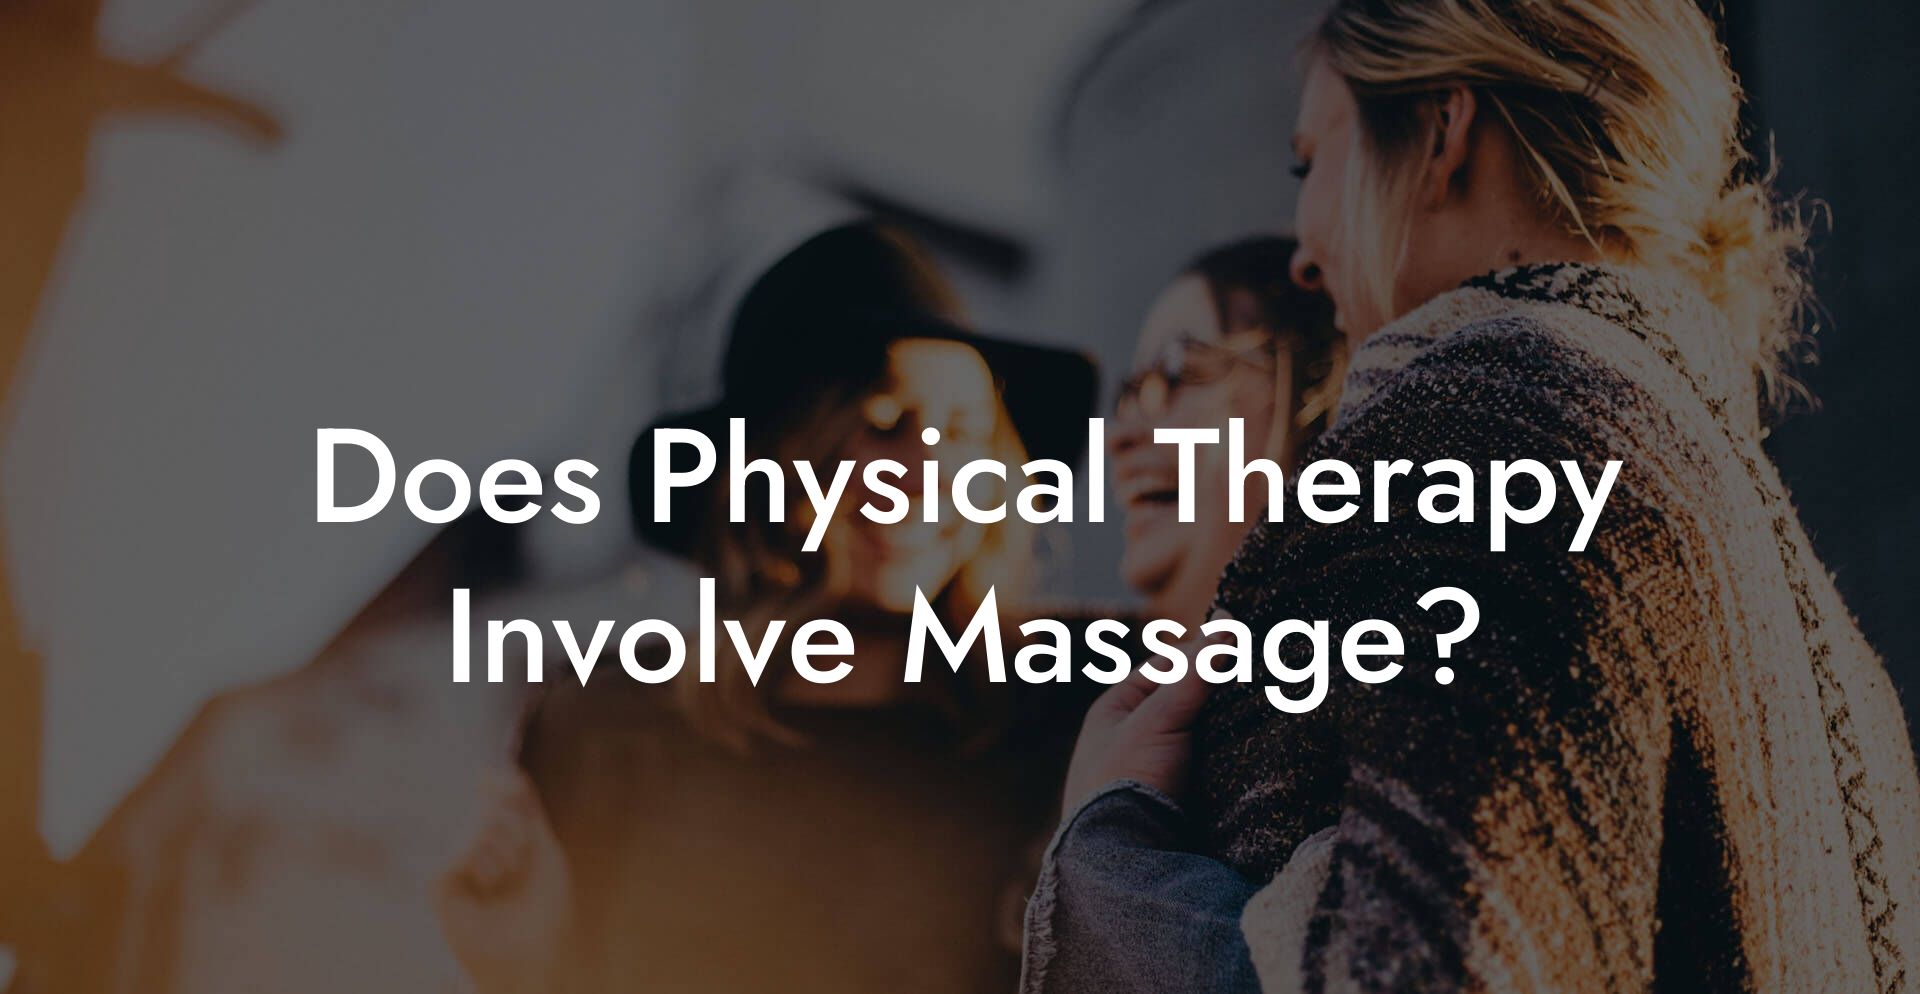 Does Physical Therapy Involve Massage?